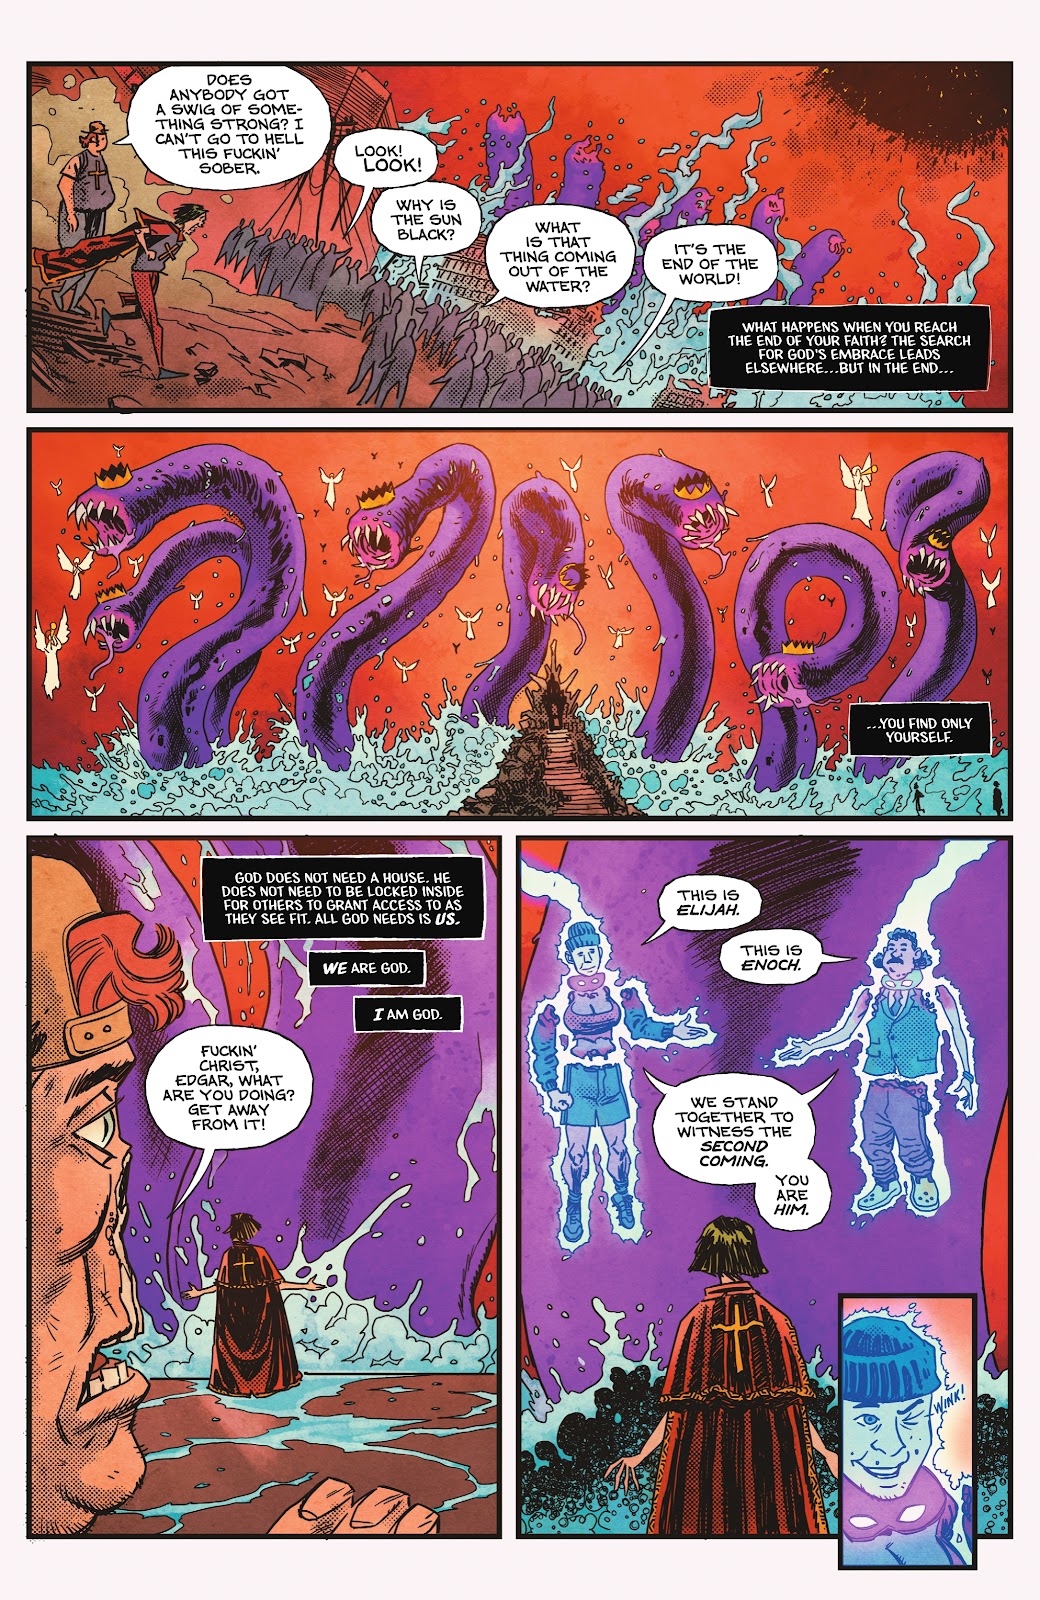 DC Horror Presents: Soul Plumber issue 6 - Page 22